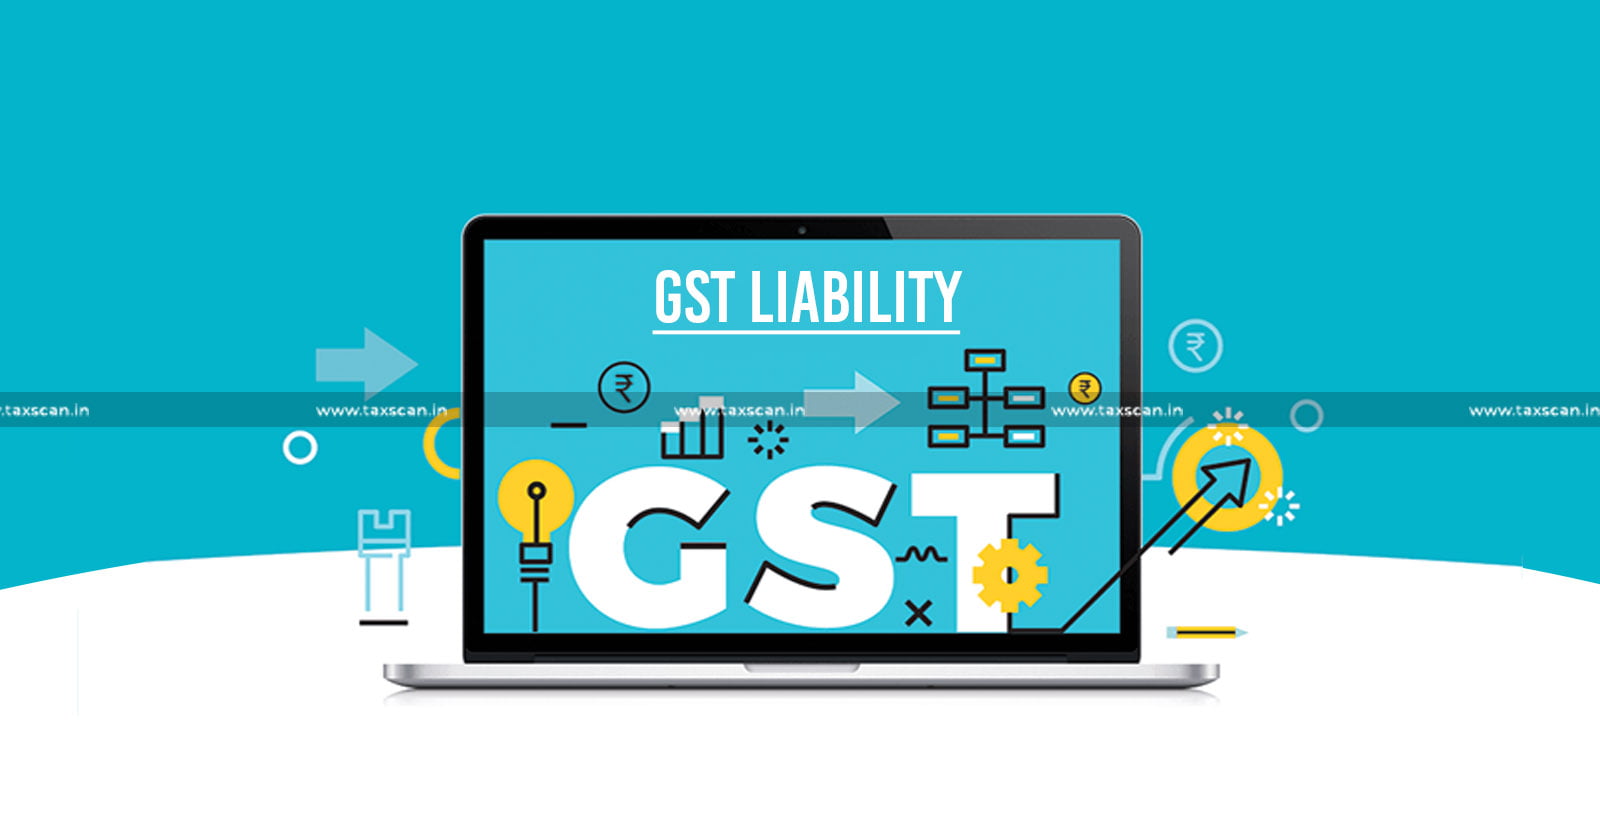 Payment of Tax - Penalty - Goods - Payment of Tax and Penalty - Admission - GST Liability - GST - Delhi High Court - taxscan